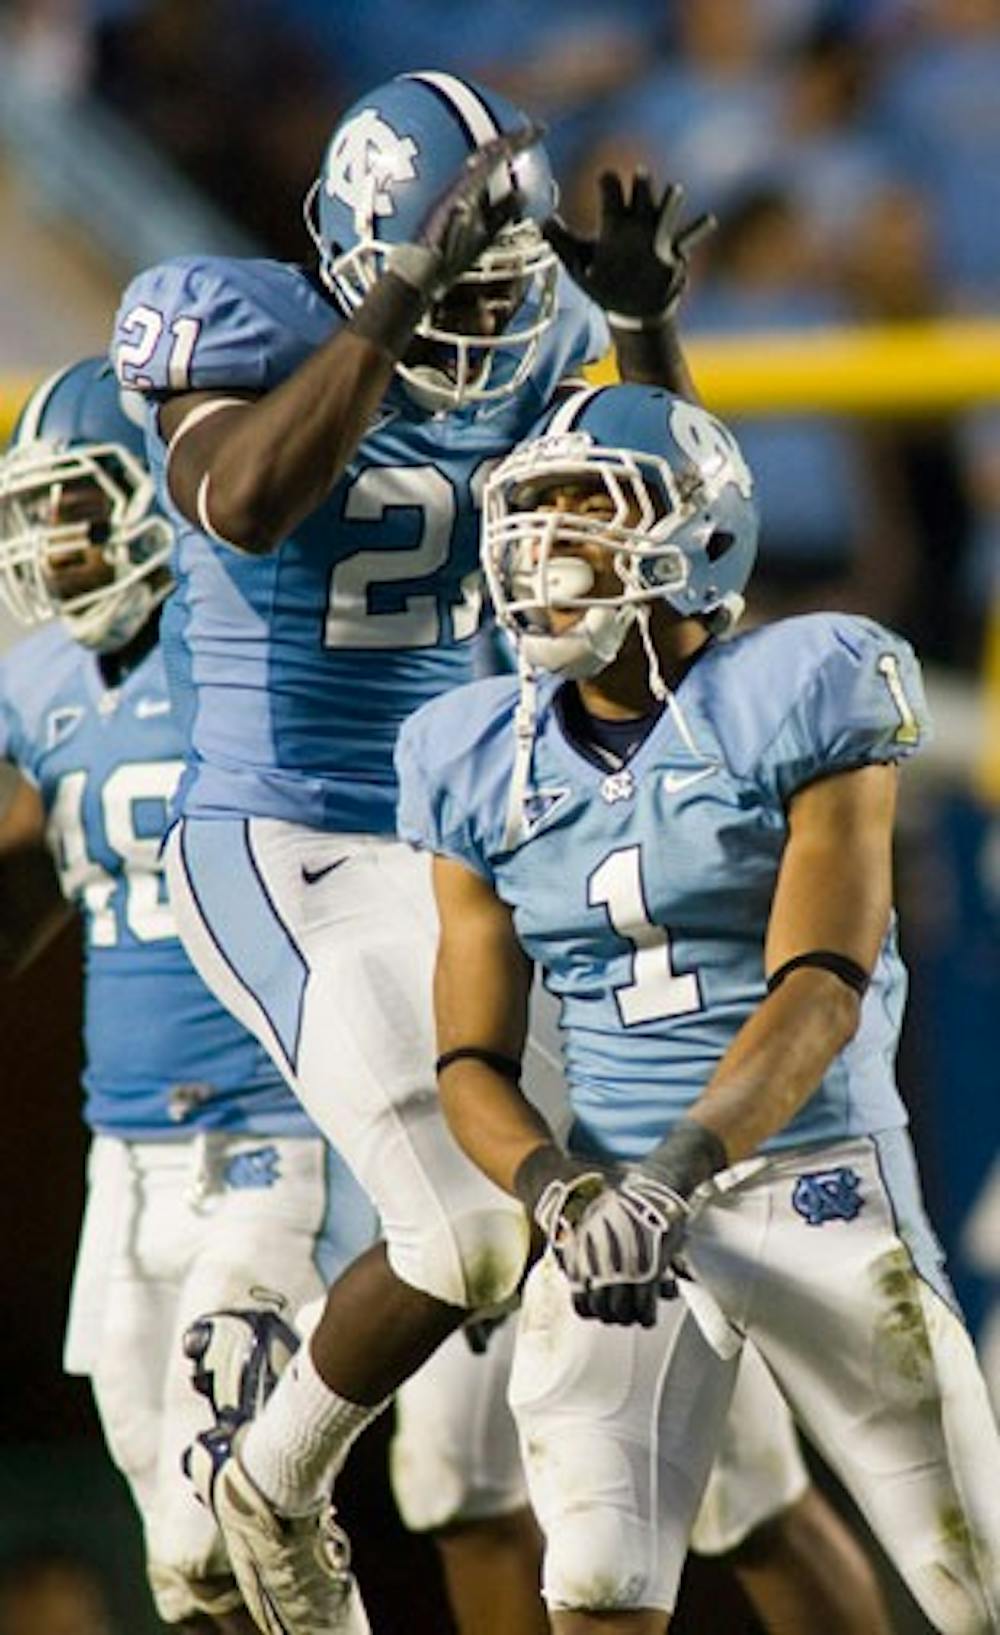 Da’Norris Searcy (21) has taken on a larger role for UNC’s defense. He wears No 21 to honor his grandmother. DTH File/Andrew Dye